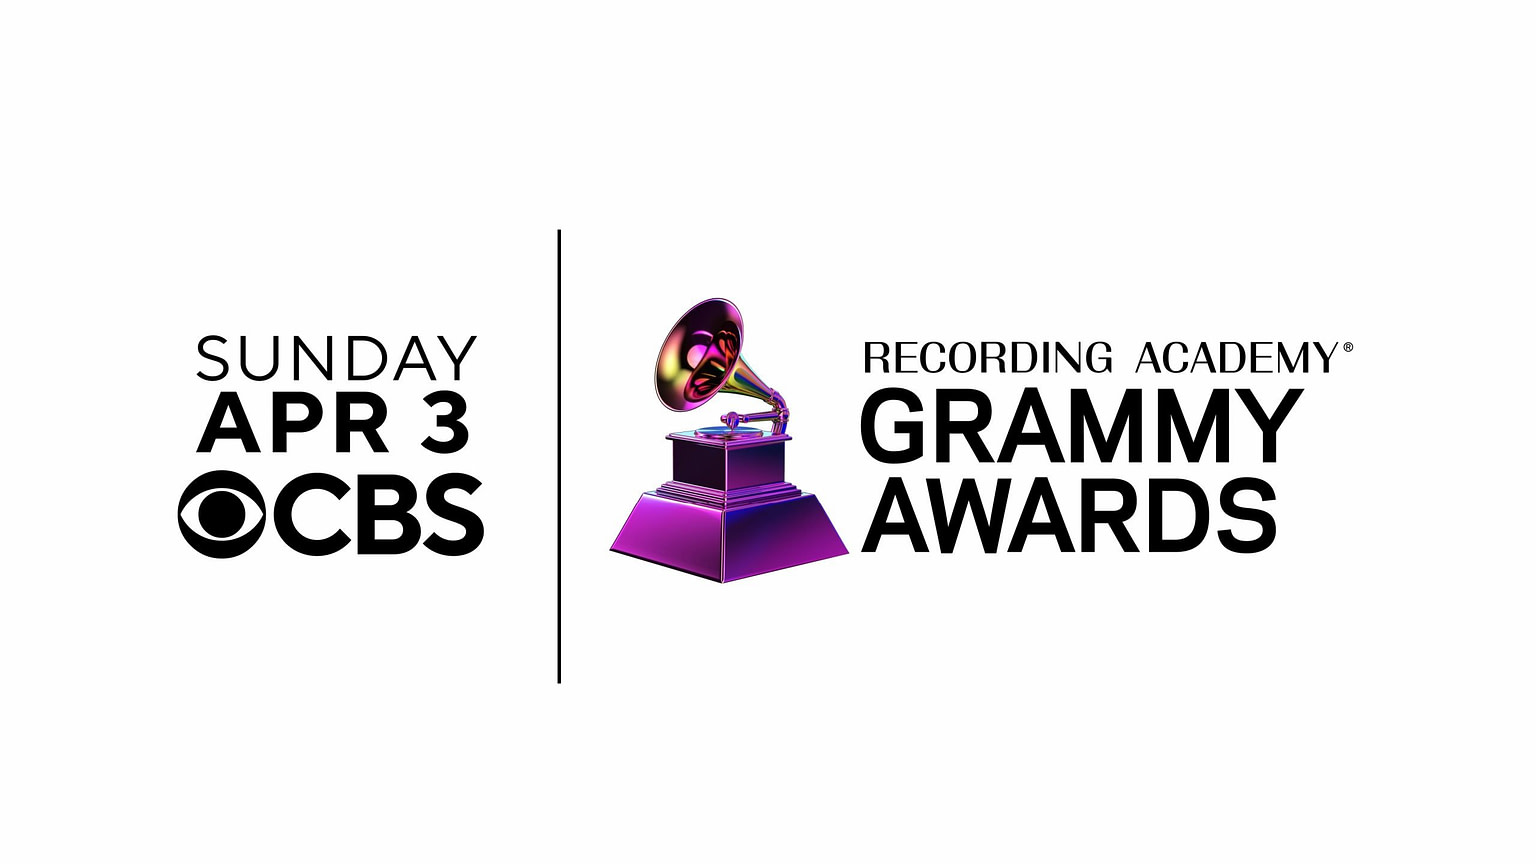 64TH ANNUAL GRAMMY AWARDS® RESCHEDULED TO SUN, APRIL 3